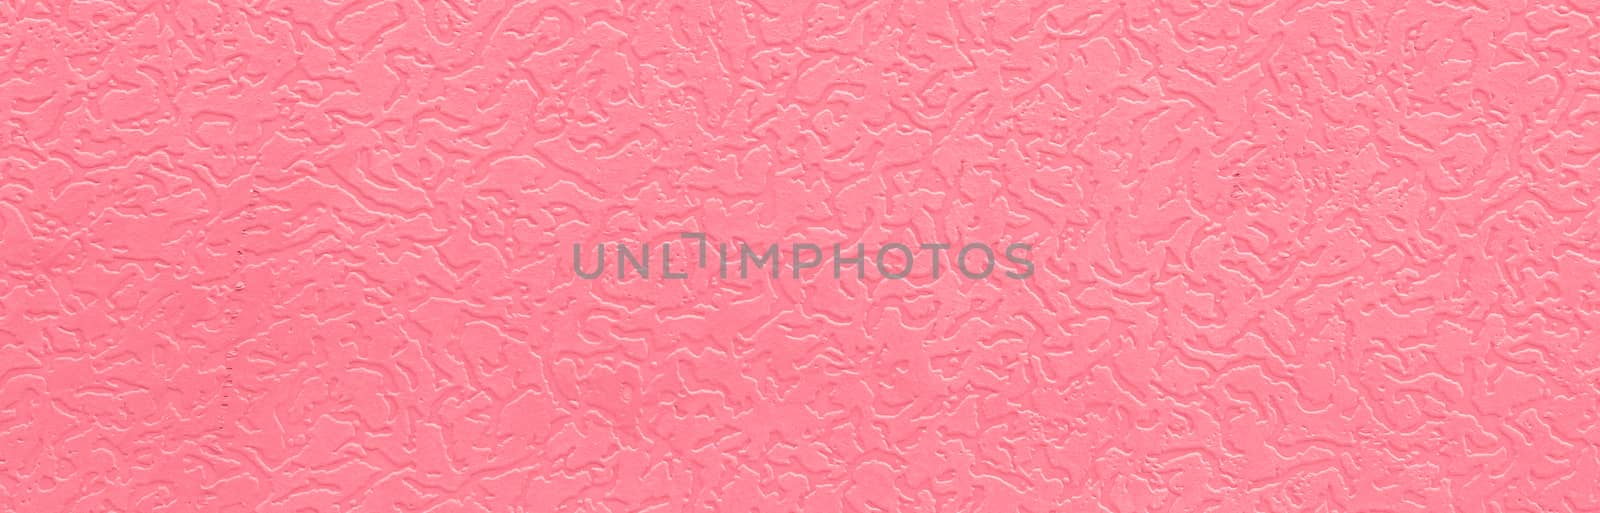 Abstract grungy decorative texture. Textured paper with copy space. The mottled surface of the paper is pink, texture closeup.